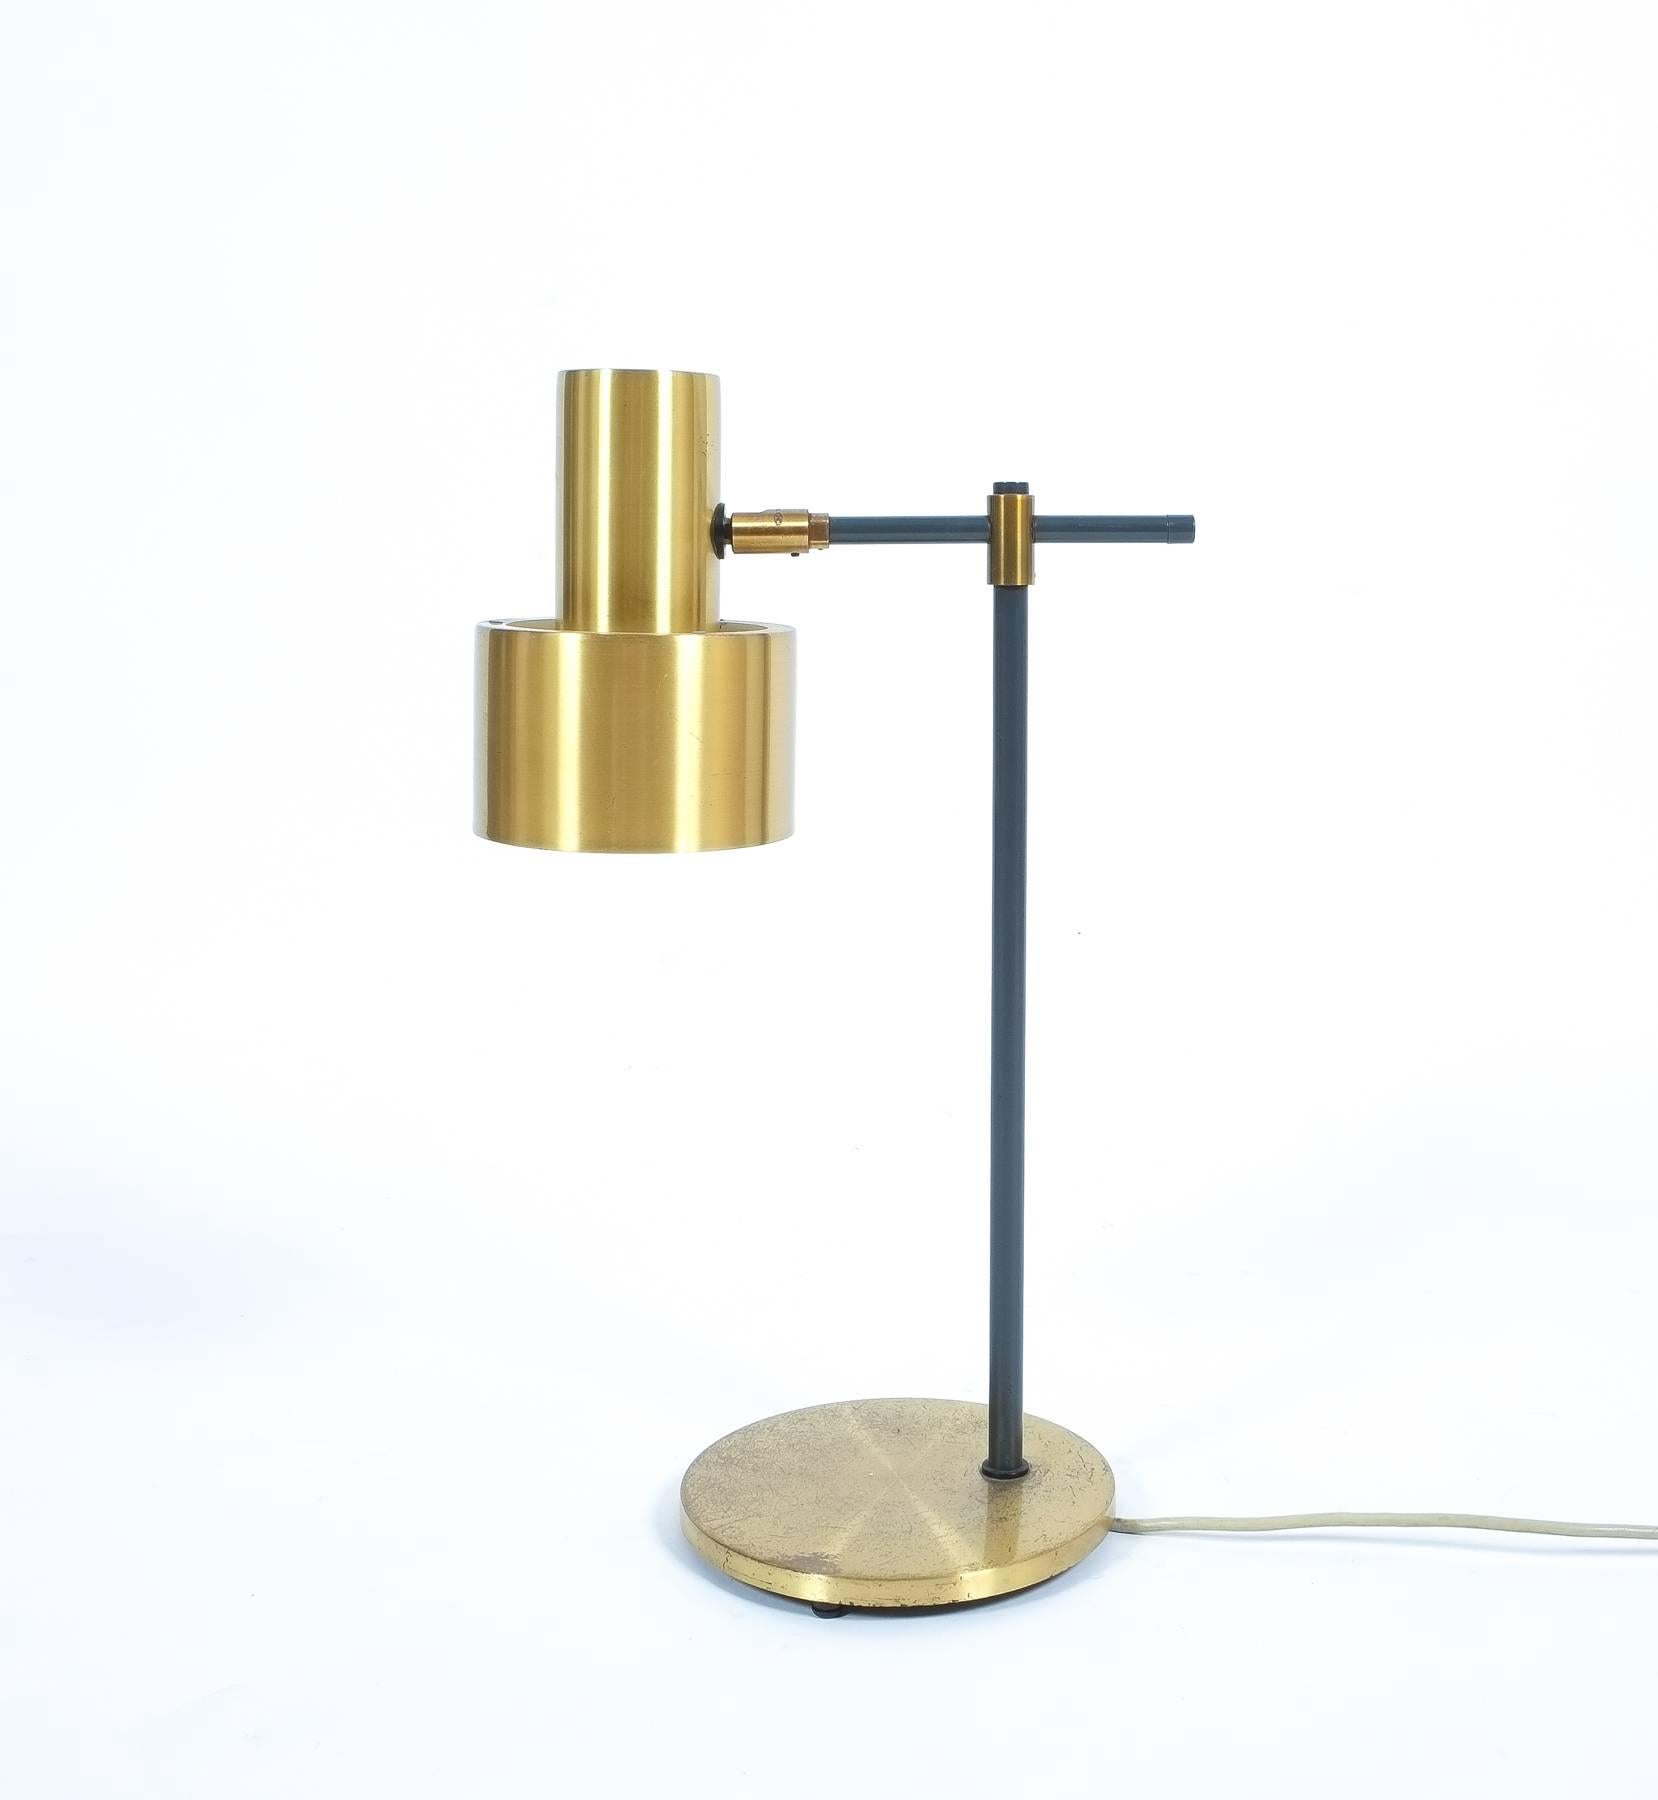 Lento, table lamp designed by Jo Hammerborg for Fog and Mørup in 1967, very rare brass desk light in very good vintage condition! A Classic Mid-Century table lamp with adjustable brass shade with white inner coating, dark gray lacquered metal arm